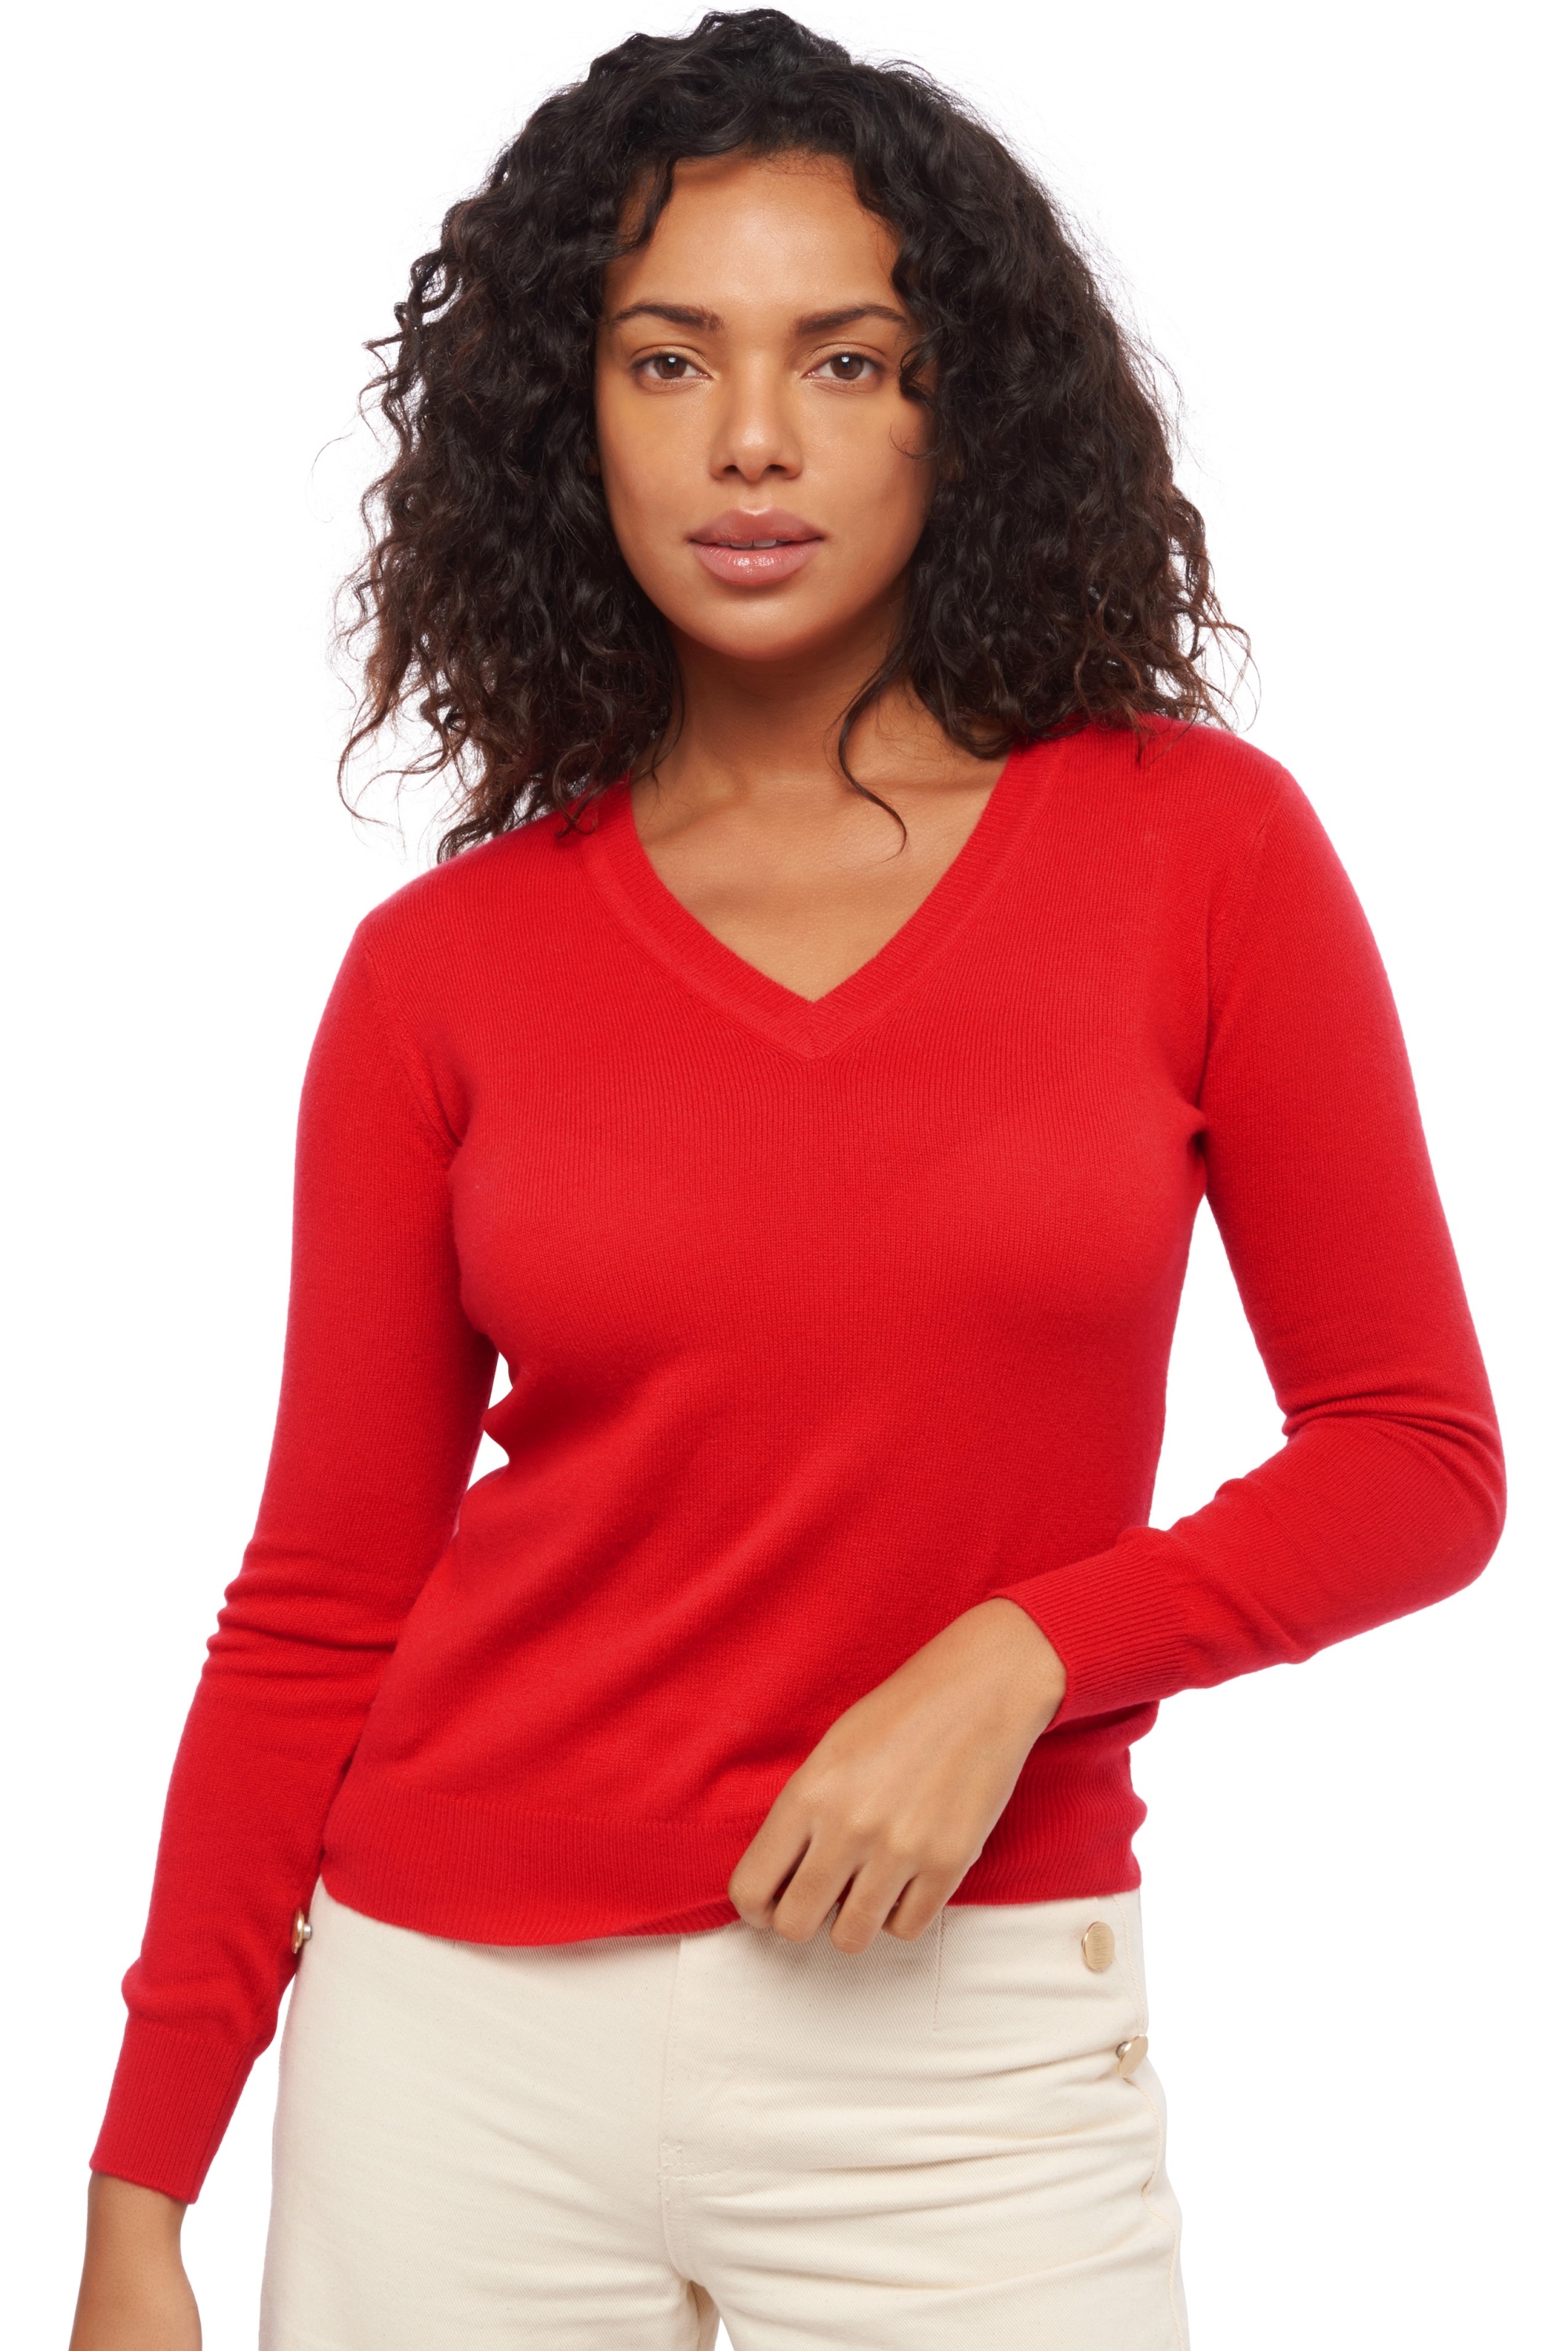 Cashmere ladies faustine blood red 4xl